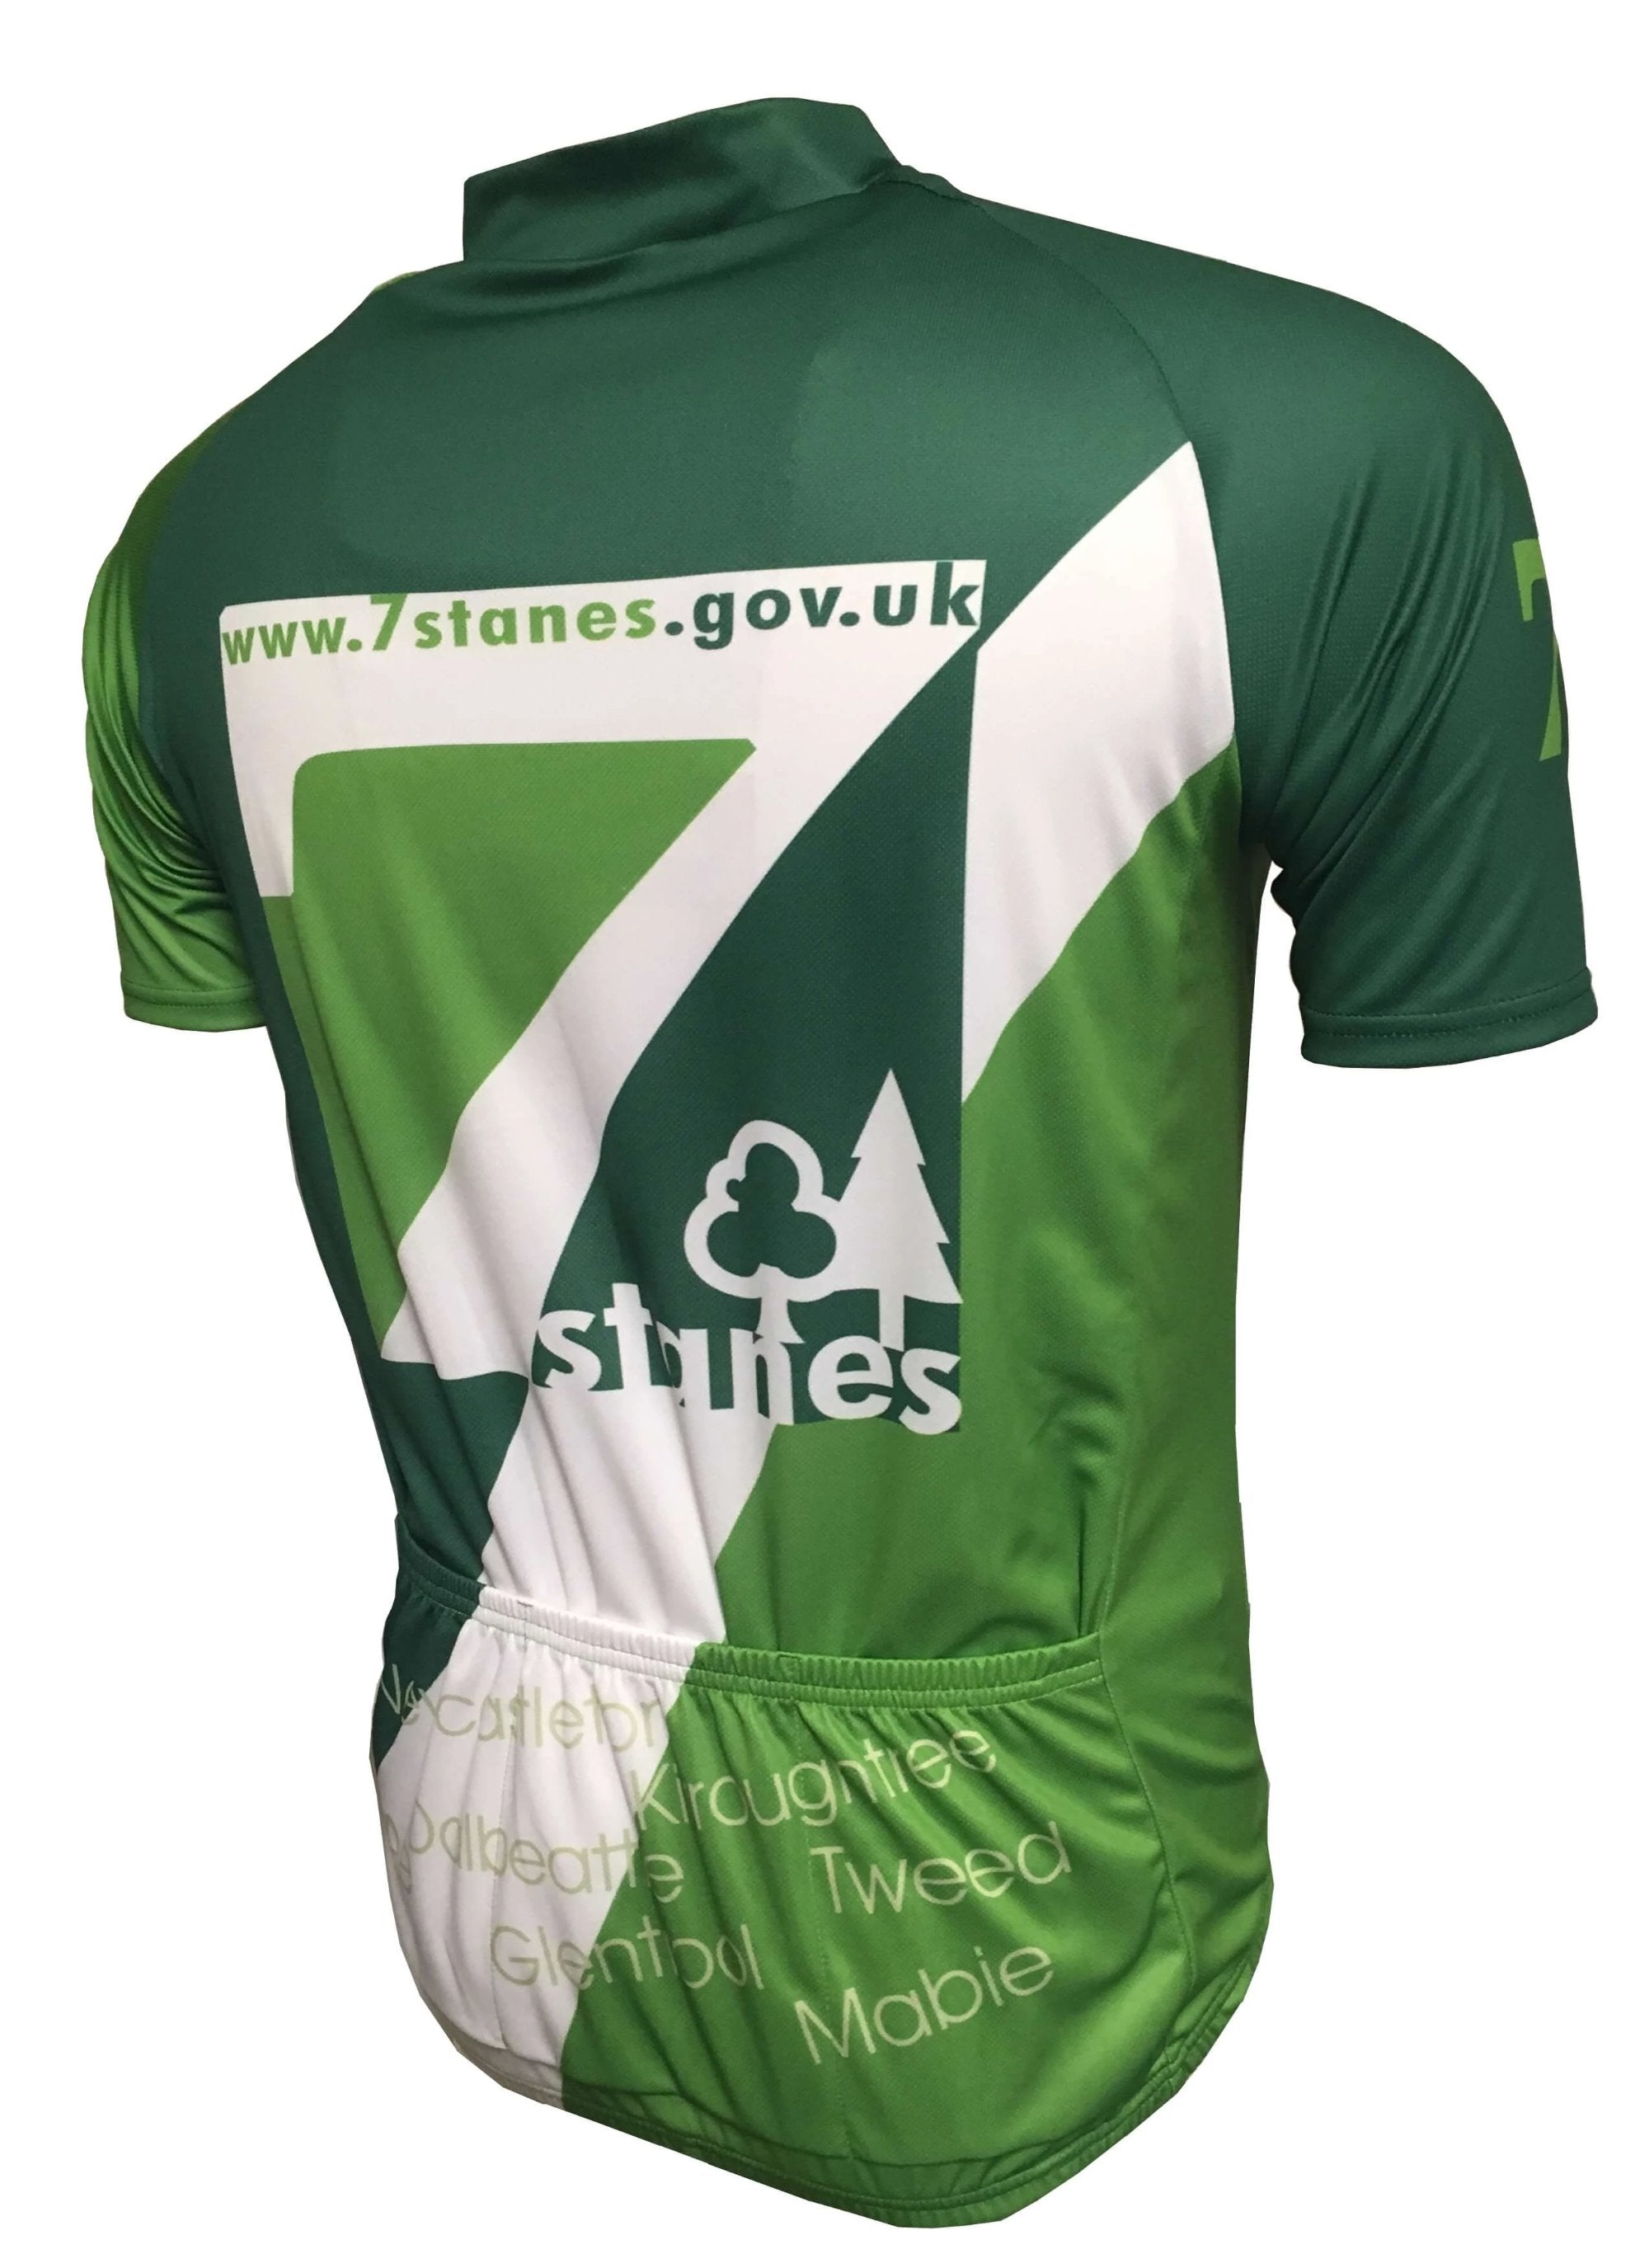 7 Stanes Classic Cycling Jersey Back 